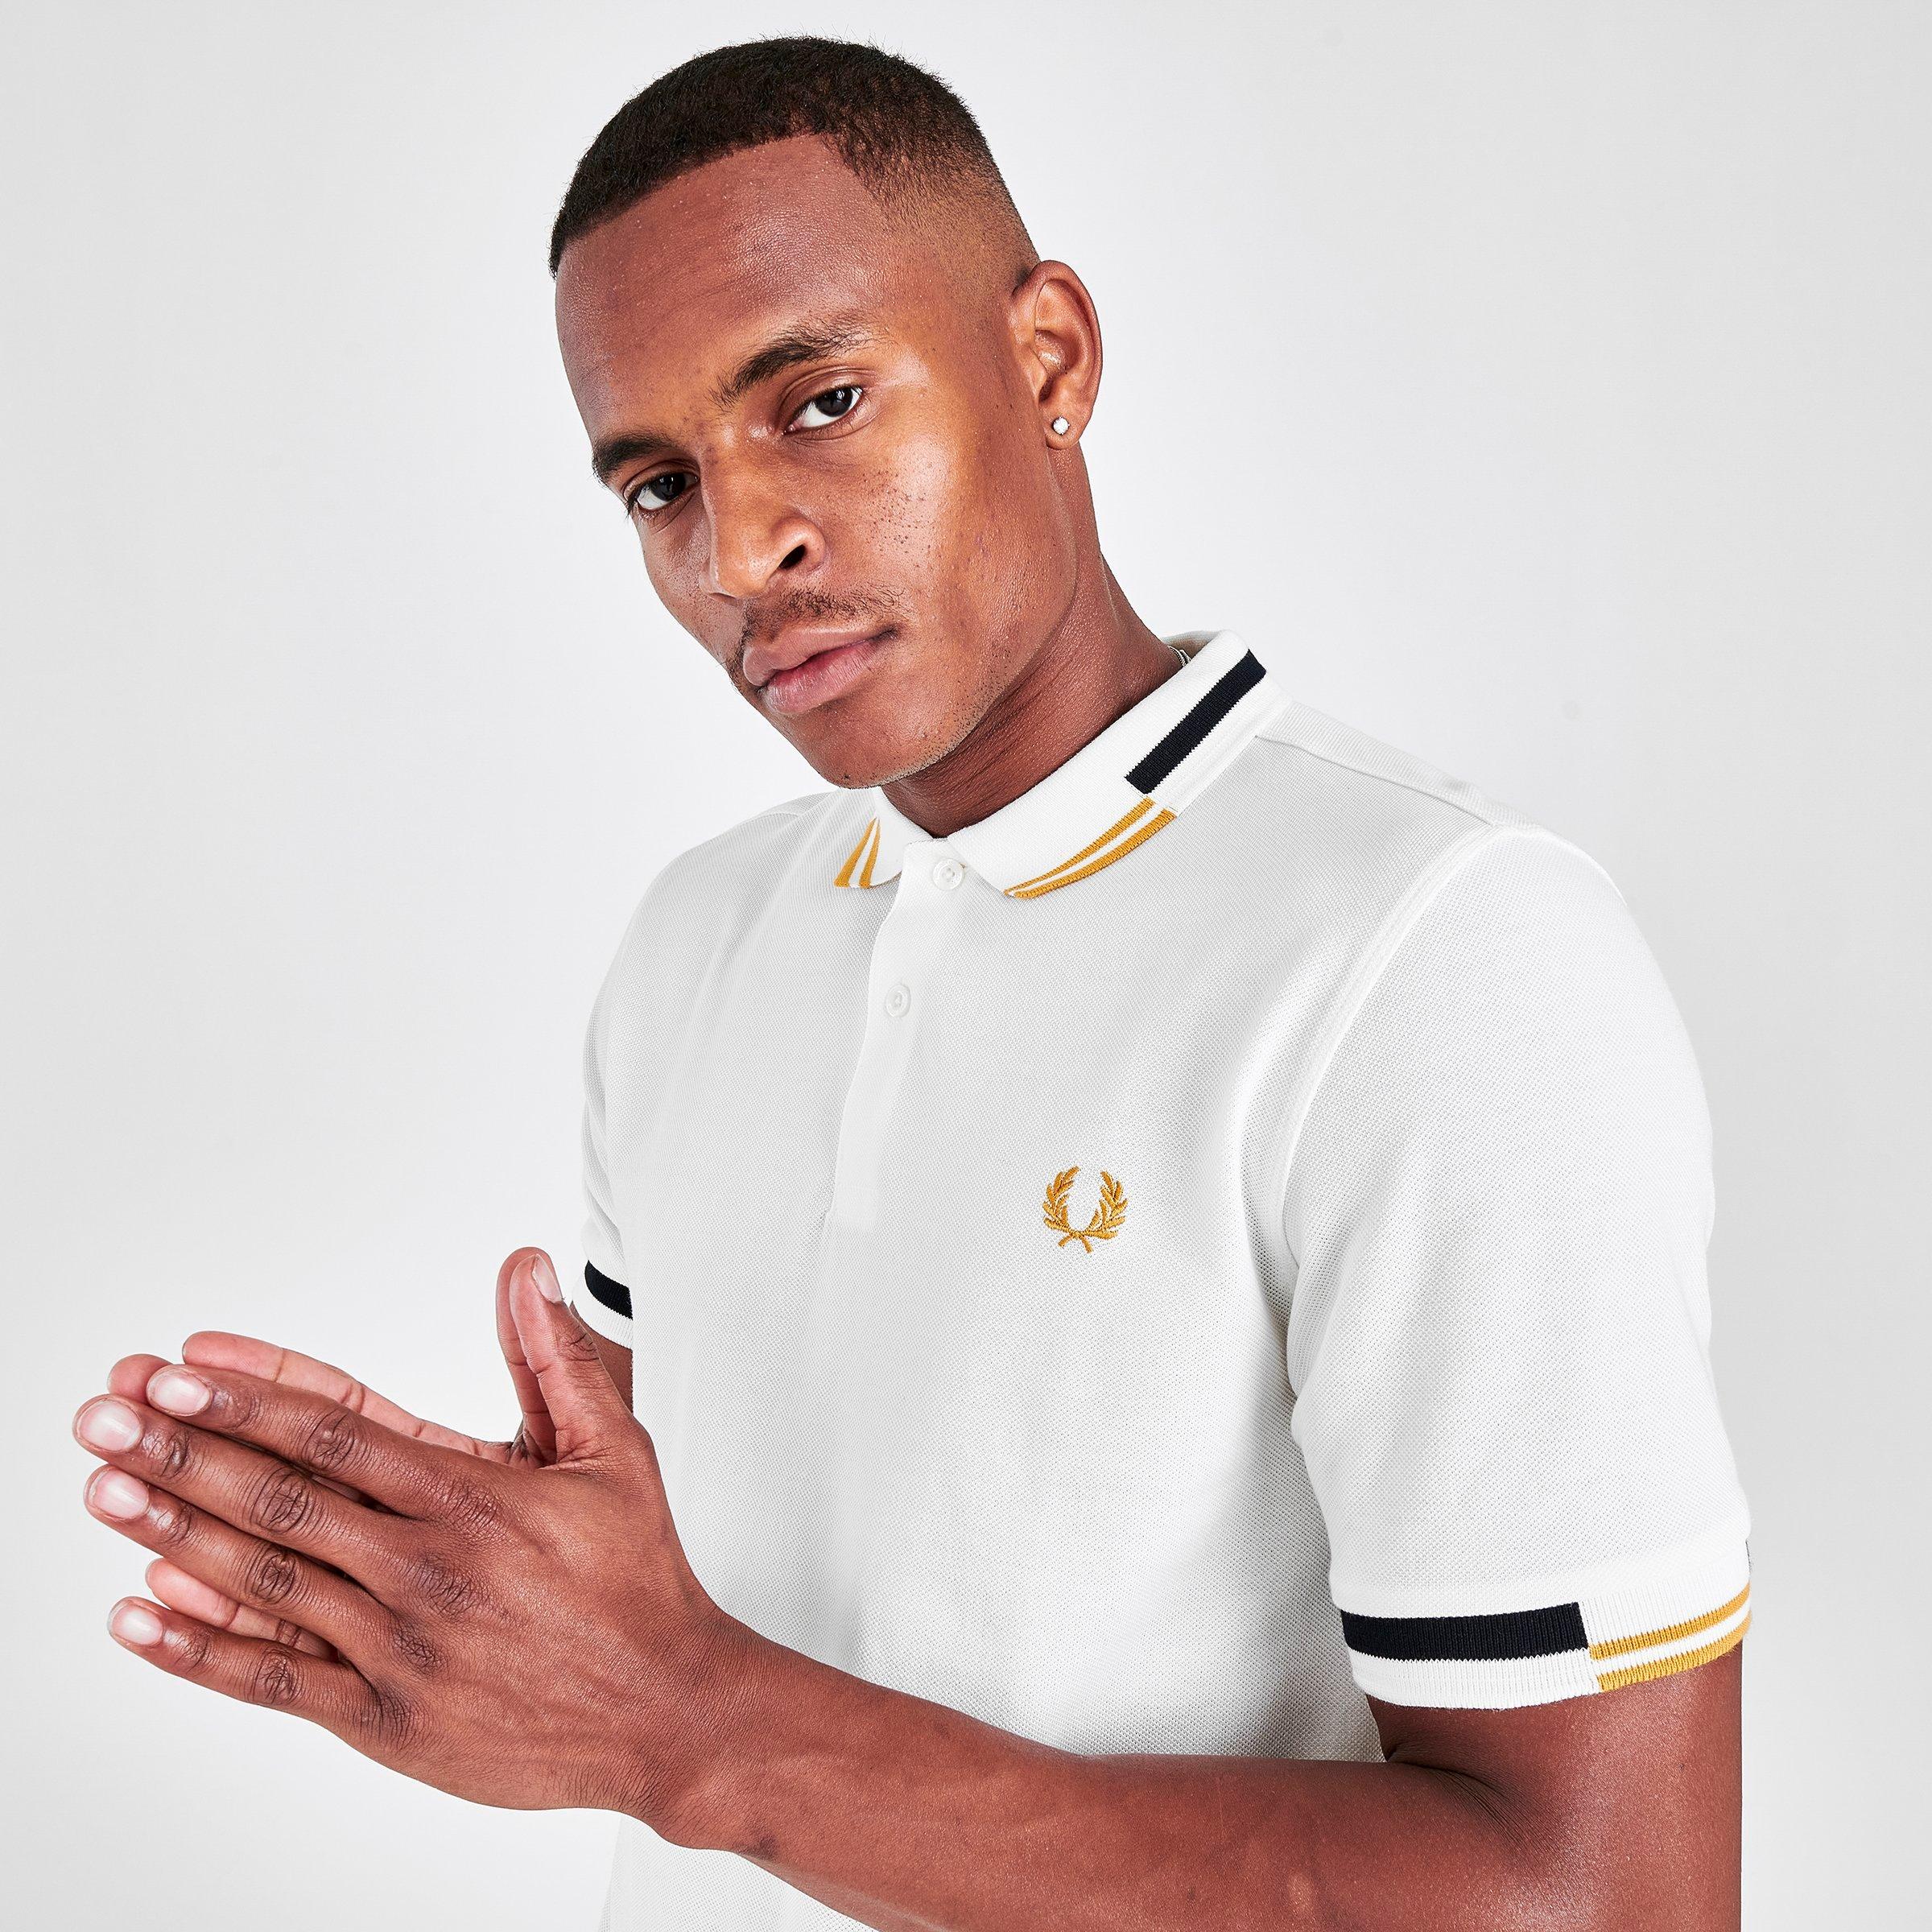 fred perry black gold polo